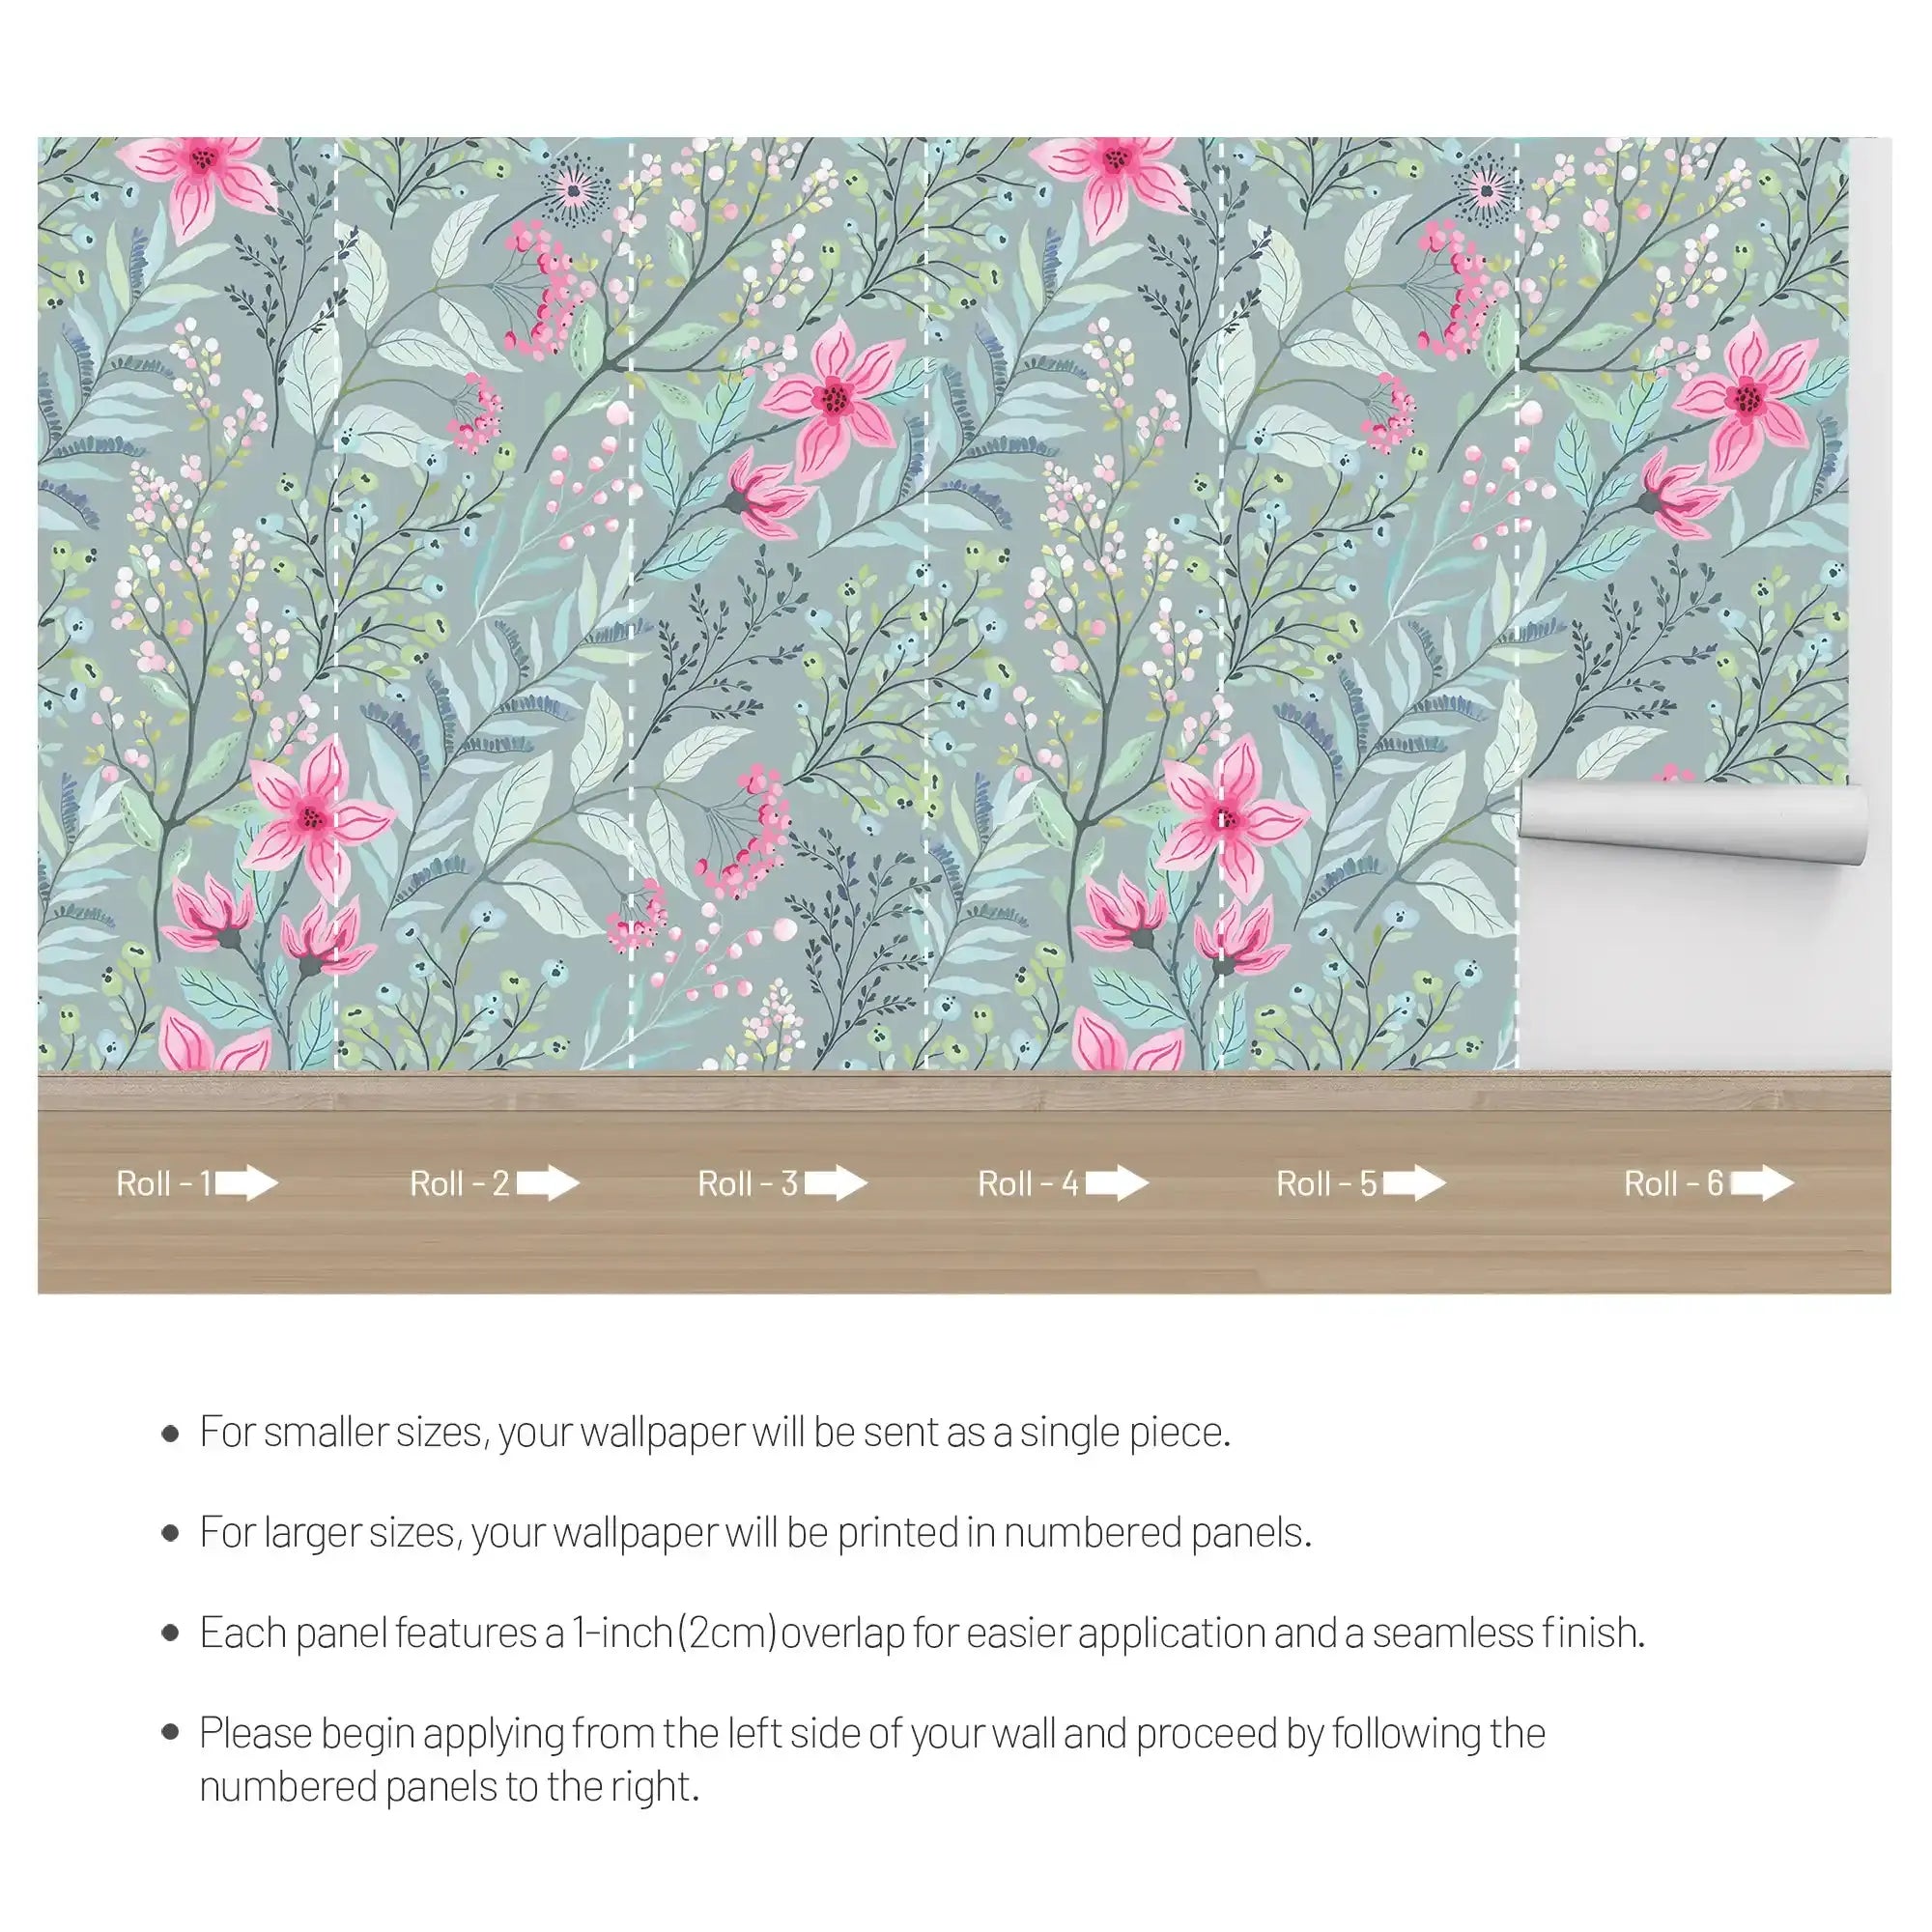 3105-A / Peel and Stick Floral Wallpaper: Pink Flowers and Leaf Design, Easy Apply Wall Decor for Bedroom & Bathroom - Artevella